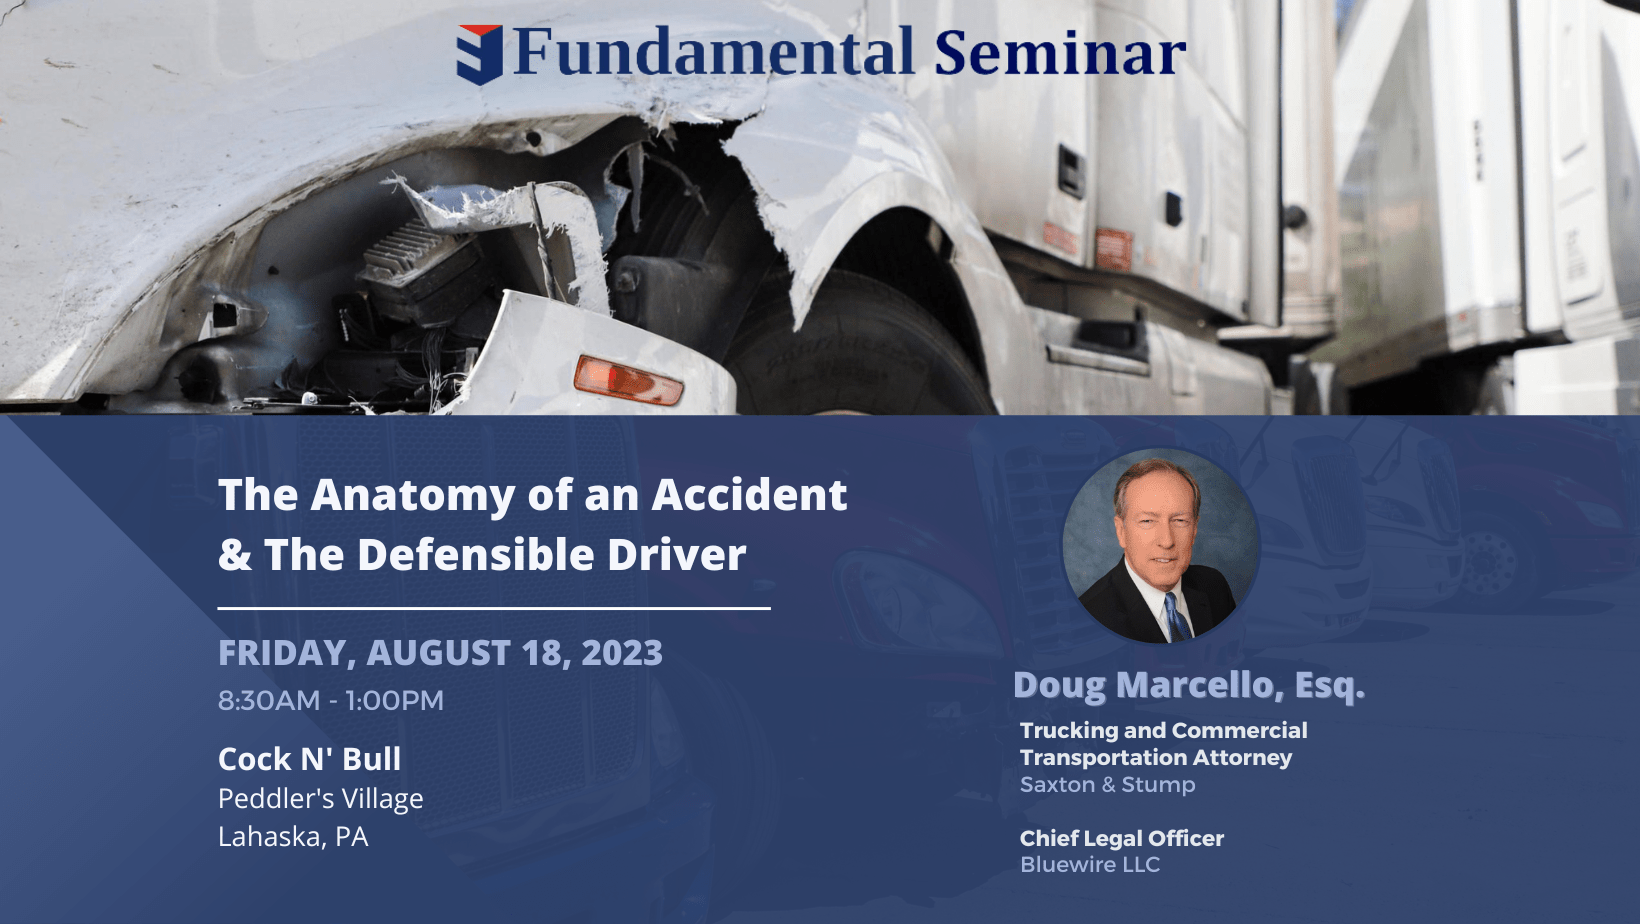 Fundamental Seminar Announcements: The Anatomy of an Accident & The Defensible Driver